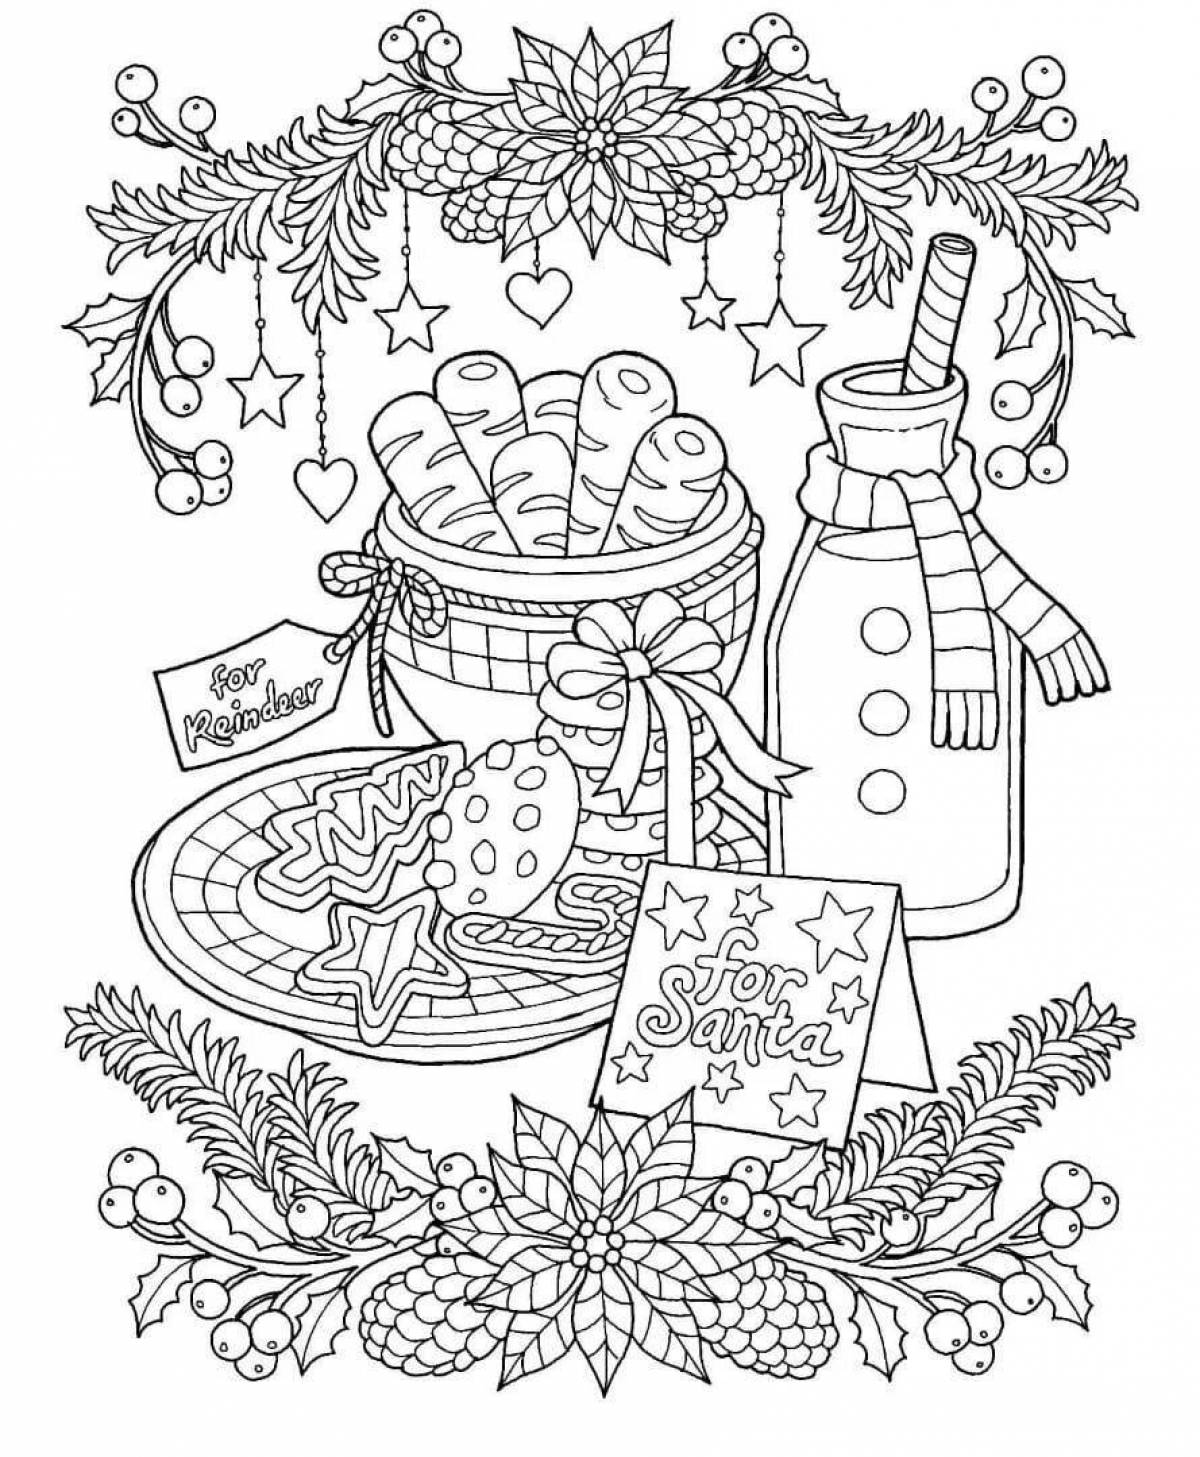 Bright Christmas coloring book for adults